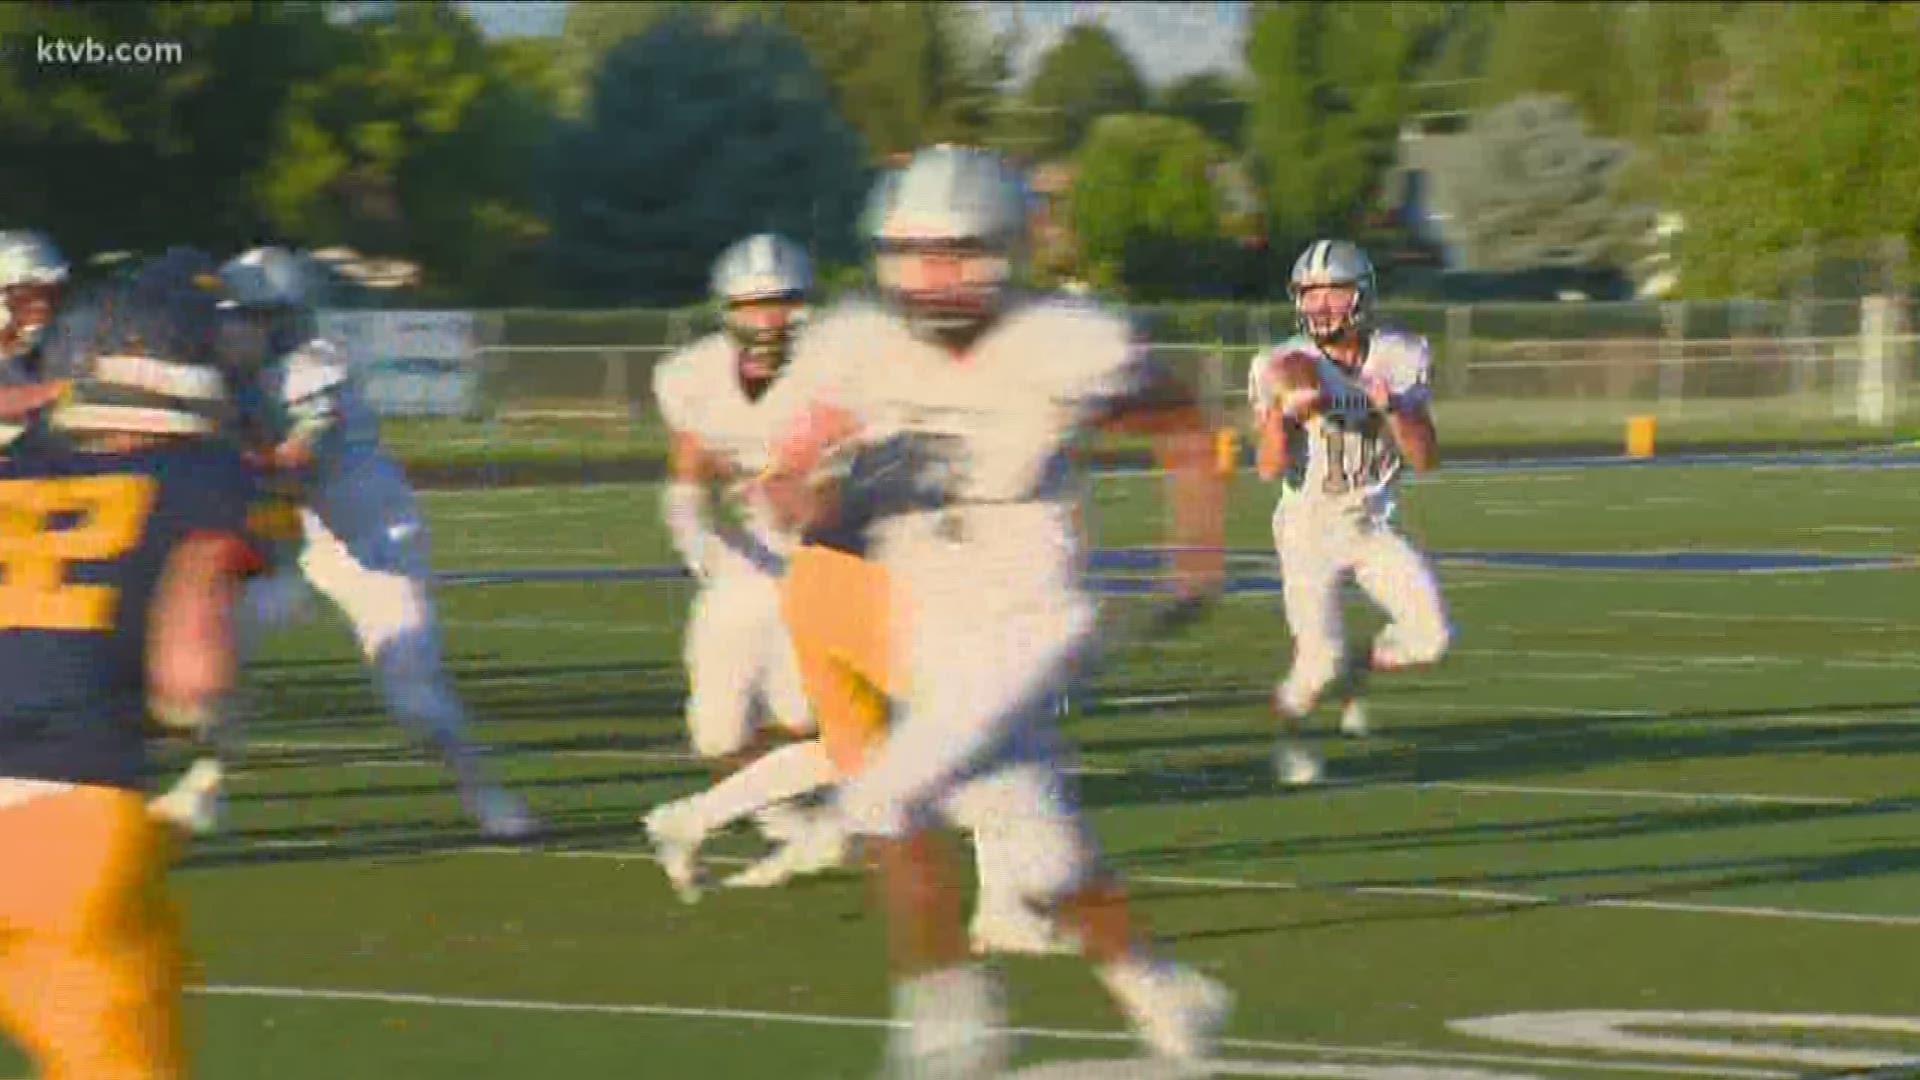 Skyview falls on the road at Meridian 6-27 in the 2019 season opener.